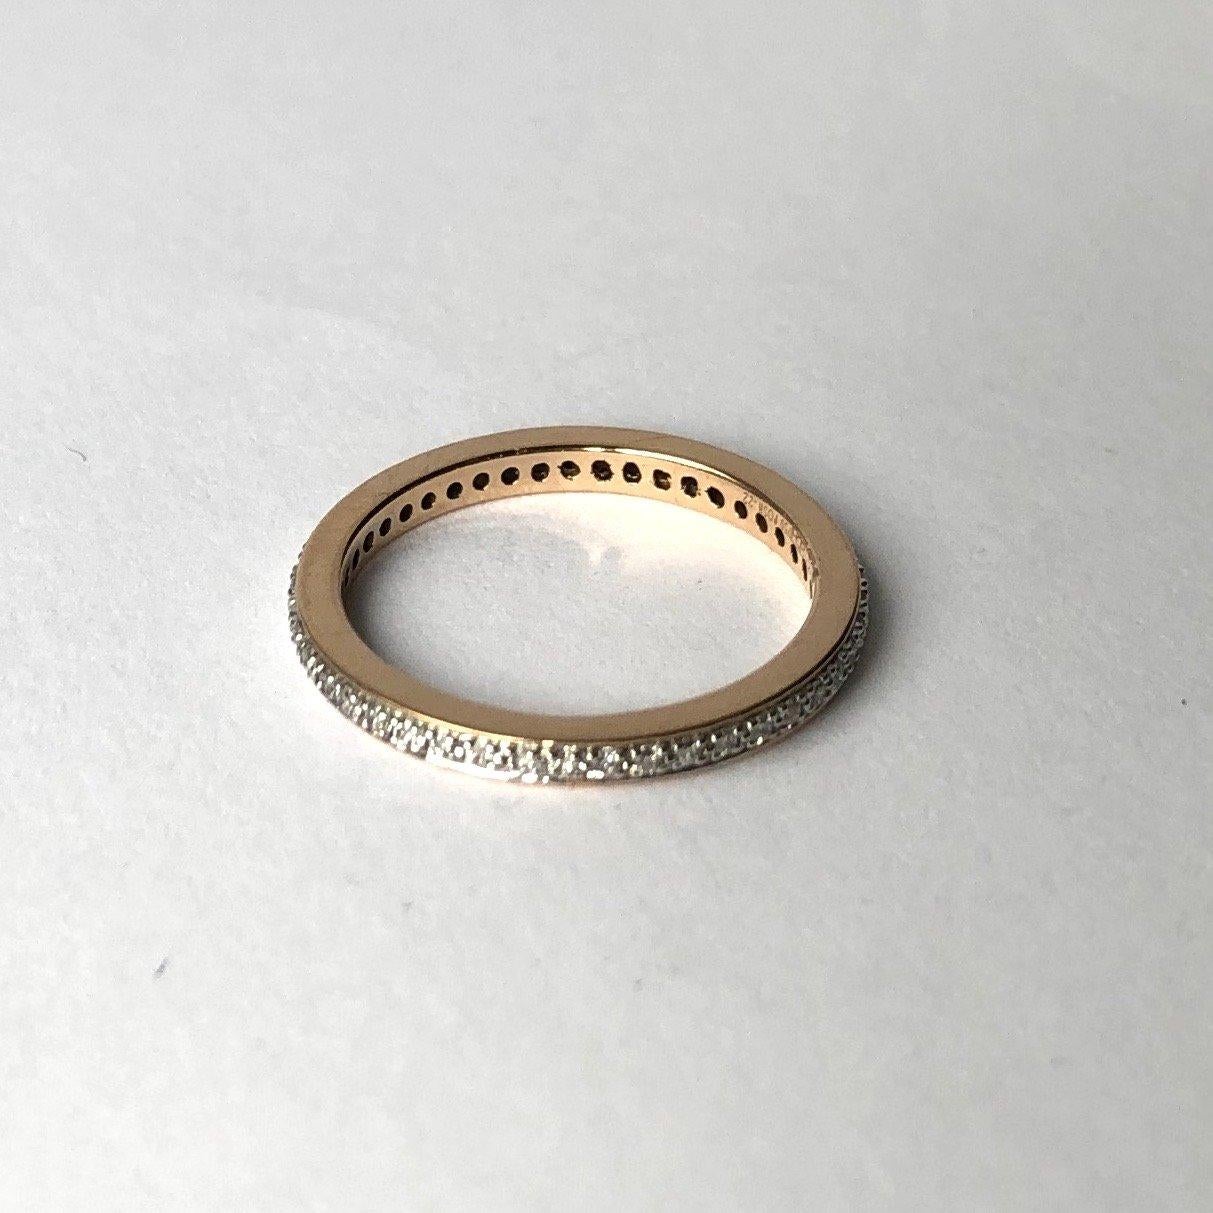 This eternity band holds small yet sparkly diamonds measuring approximately 1pt each. The diamonds are set in textured settings which makes them appear larger and add to the sparkle. The rest of the ring is modelled in yellow gold which is visible